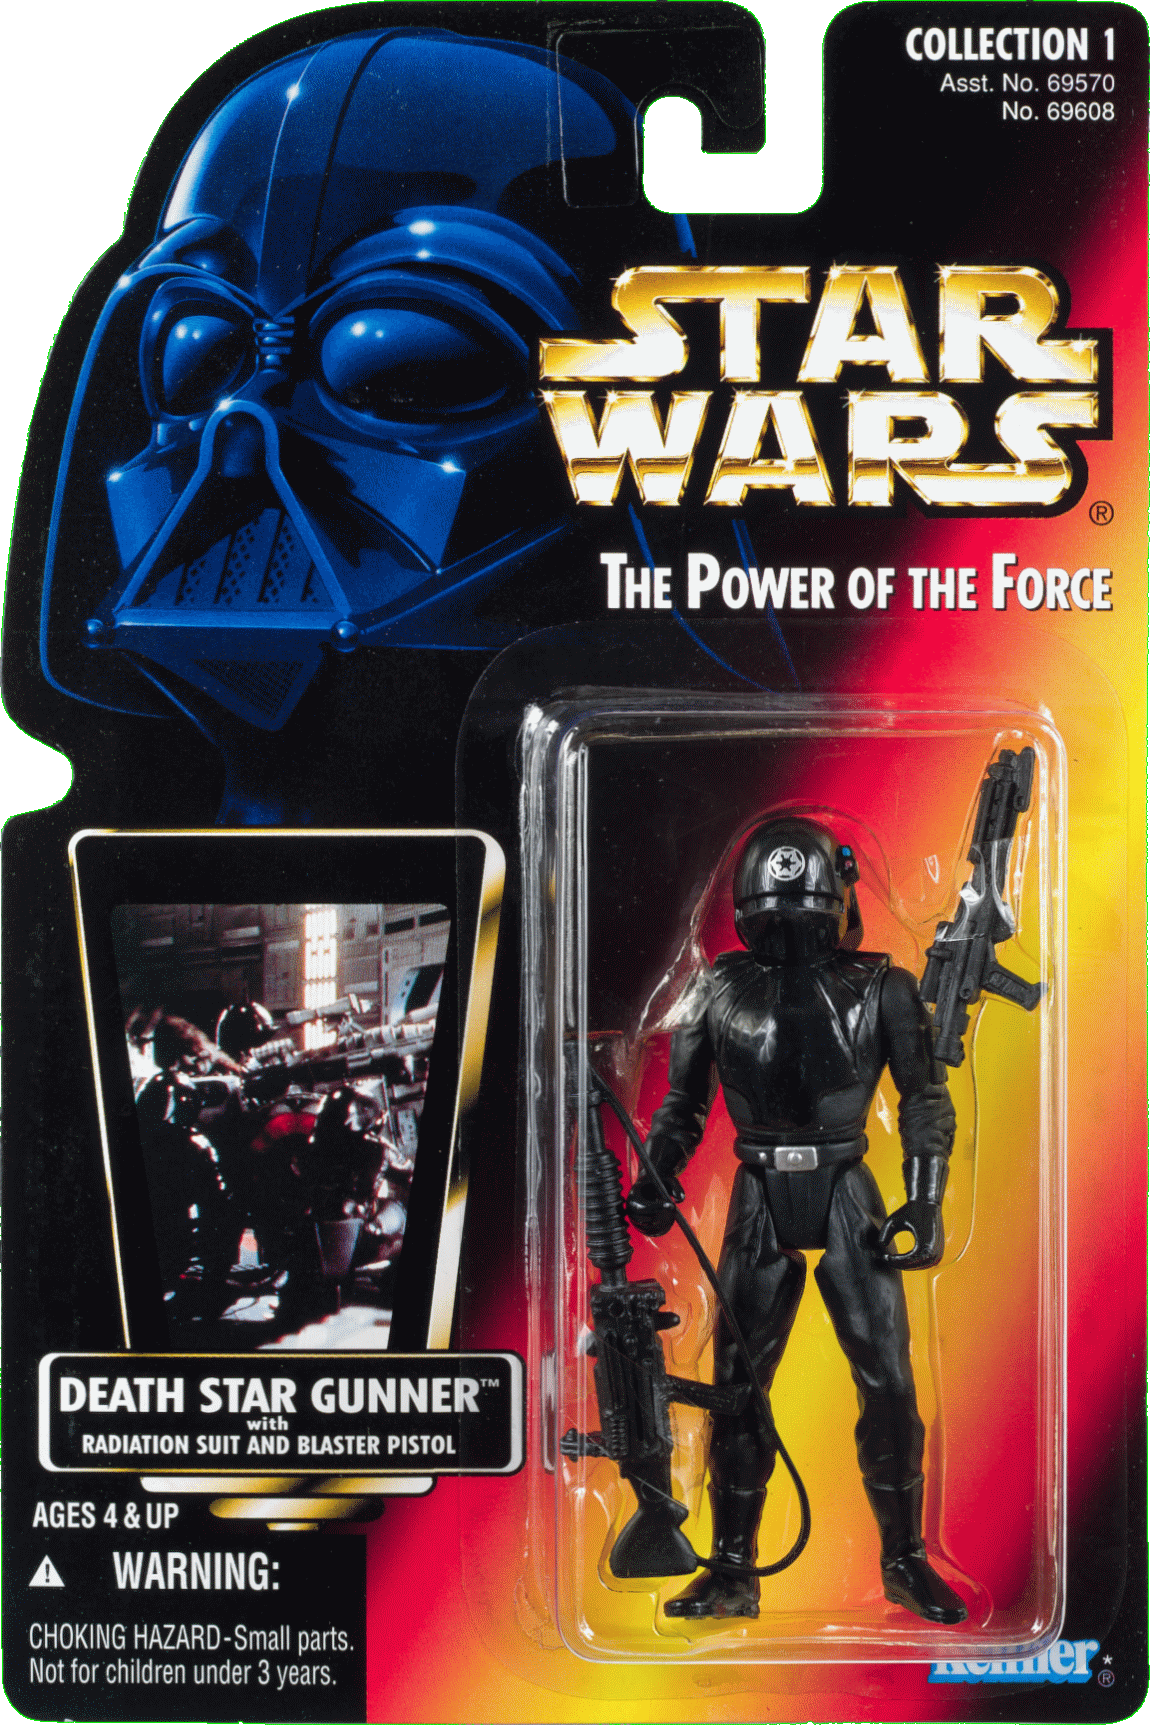 STAR WARS POWER OF THE FORCE DEATH STAR GUNNER W/ RADIATION SUIT & BLASTER MOSC 